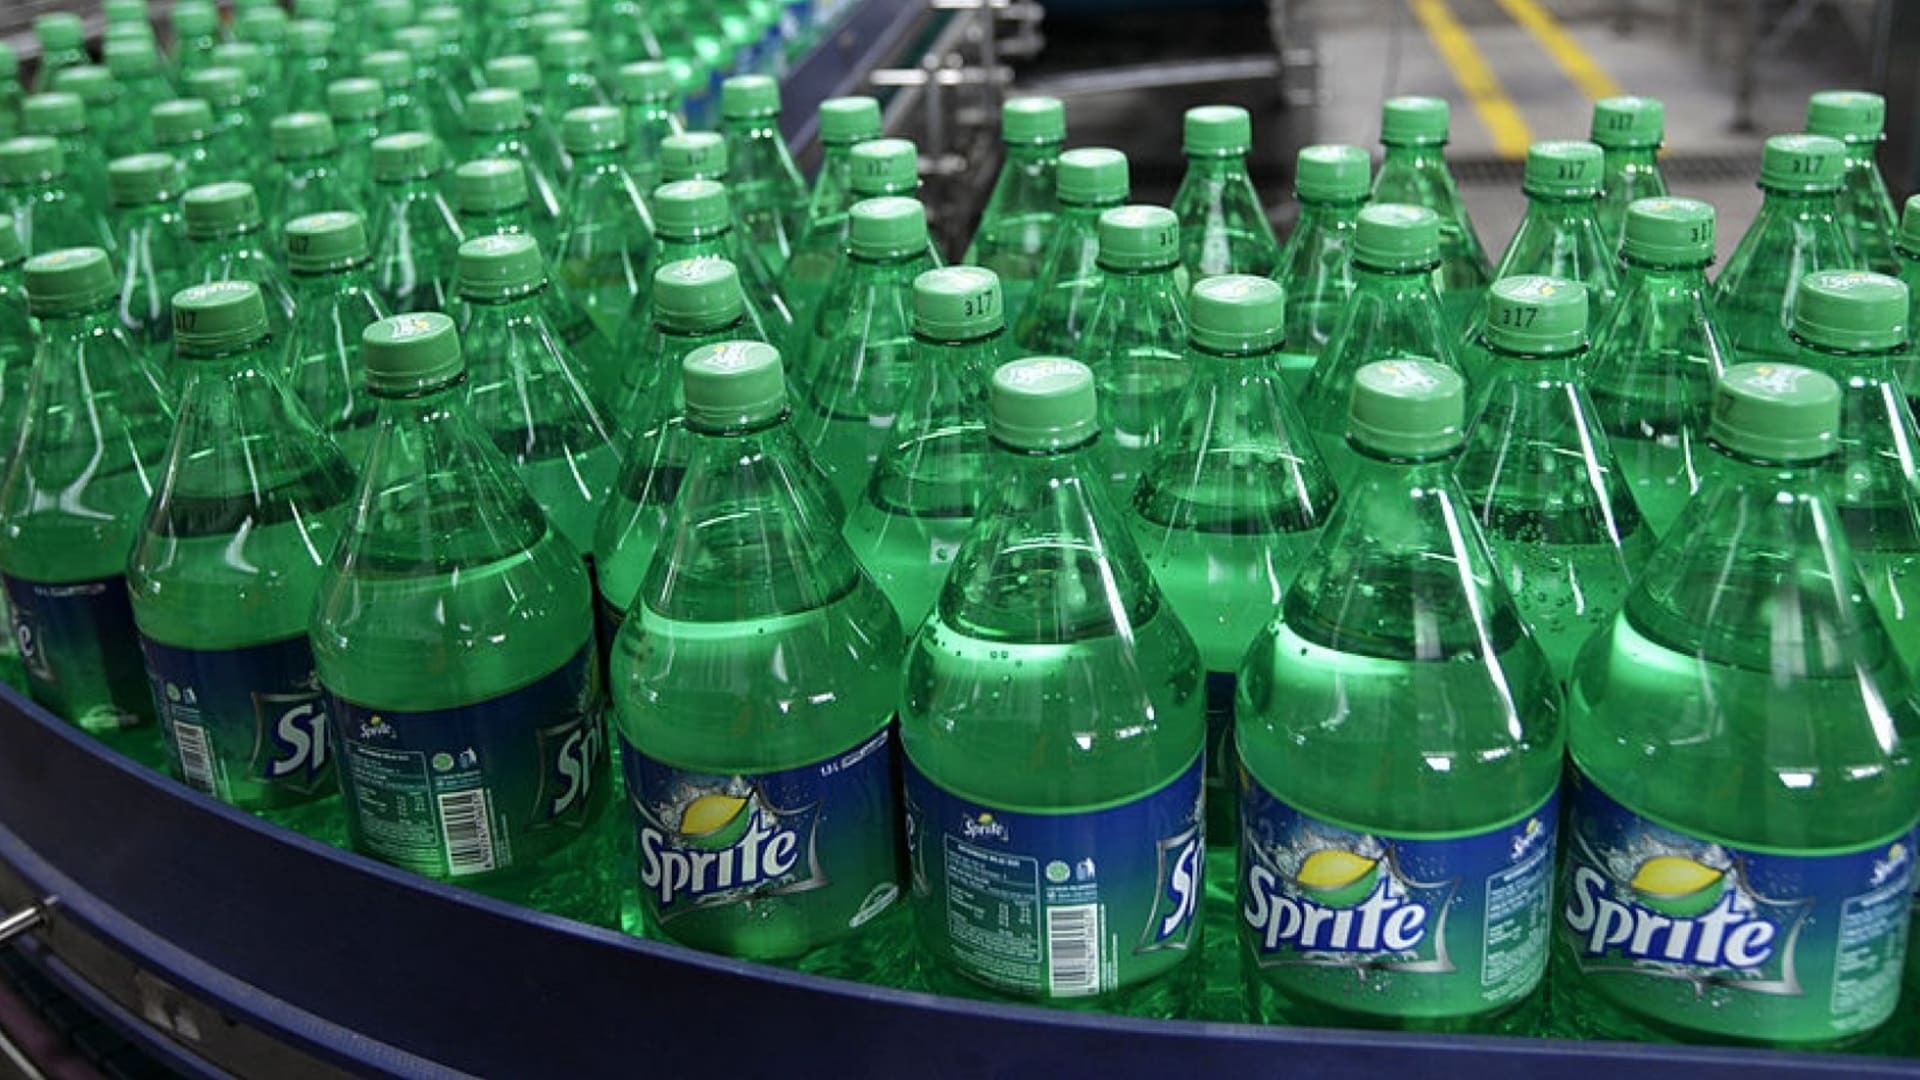 After 60 Years Sprite Is Making a Bittersweet Change